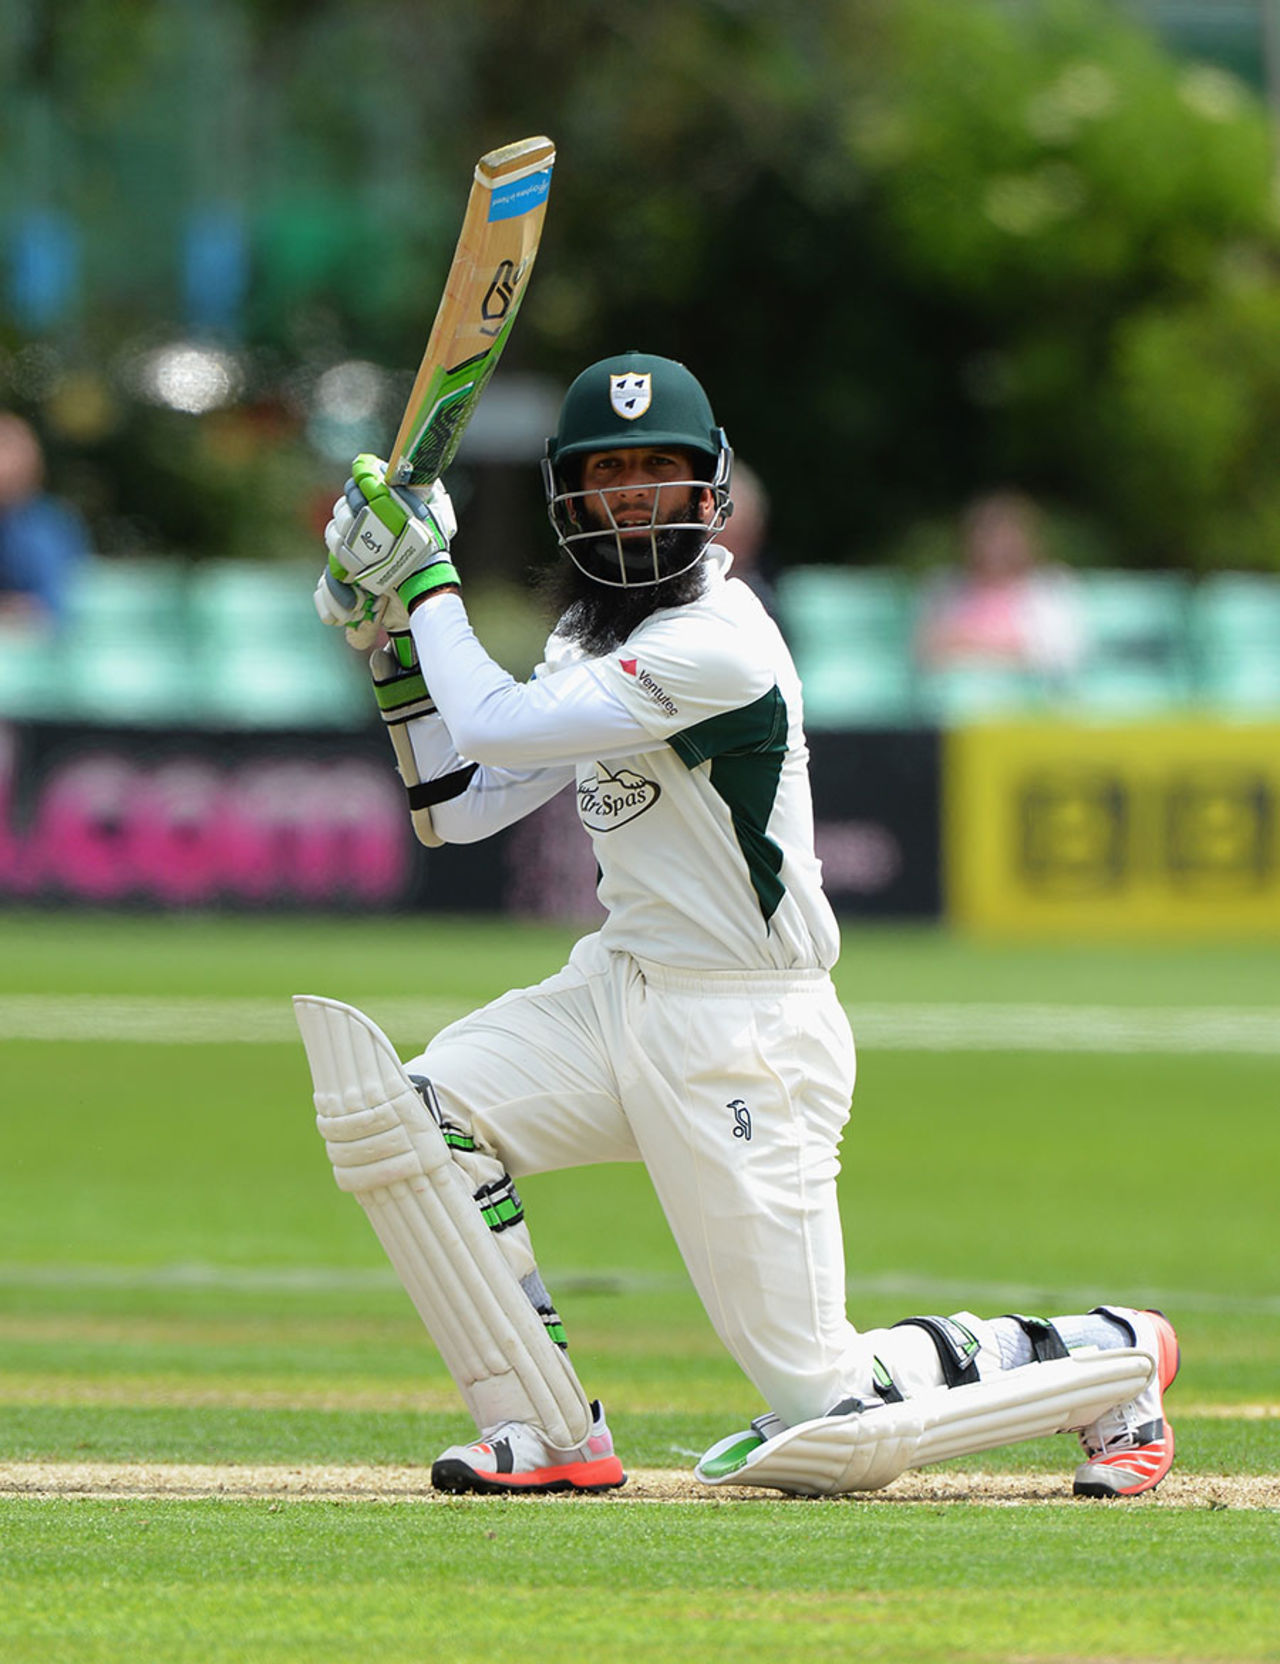 Moeen Ali is back for Worcestershire looking to find form ahead of the Ashes, Worcestershire v Warwickshire, County Championship Division One, New Road, 1st day, June 14, 2015